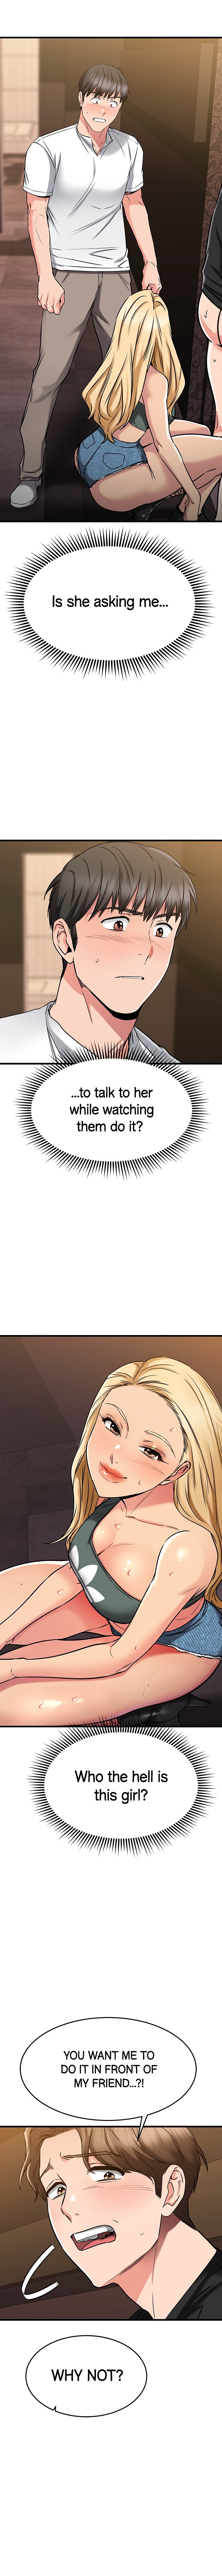 my-female-friend-who-crossed-the-line-chap-48-1